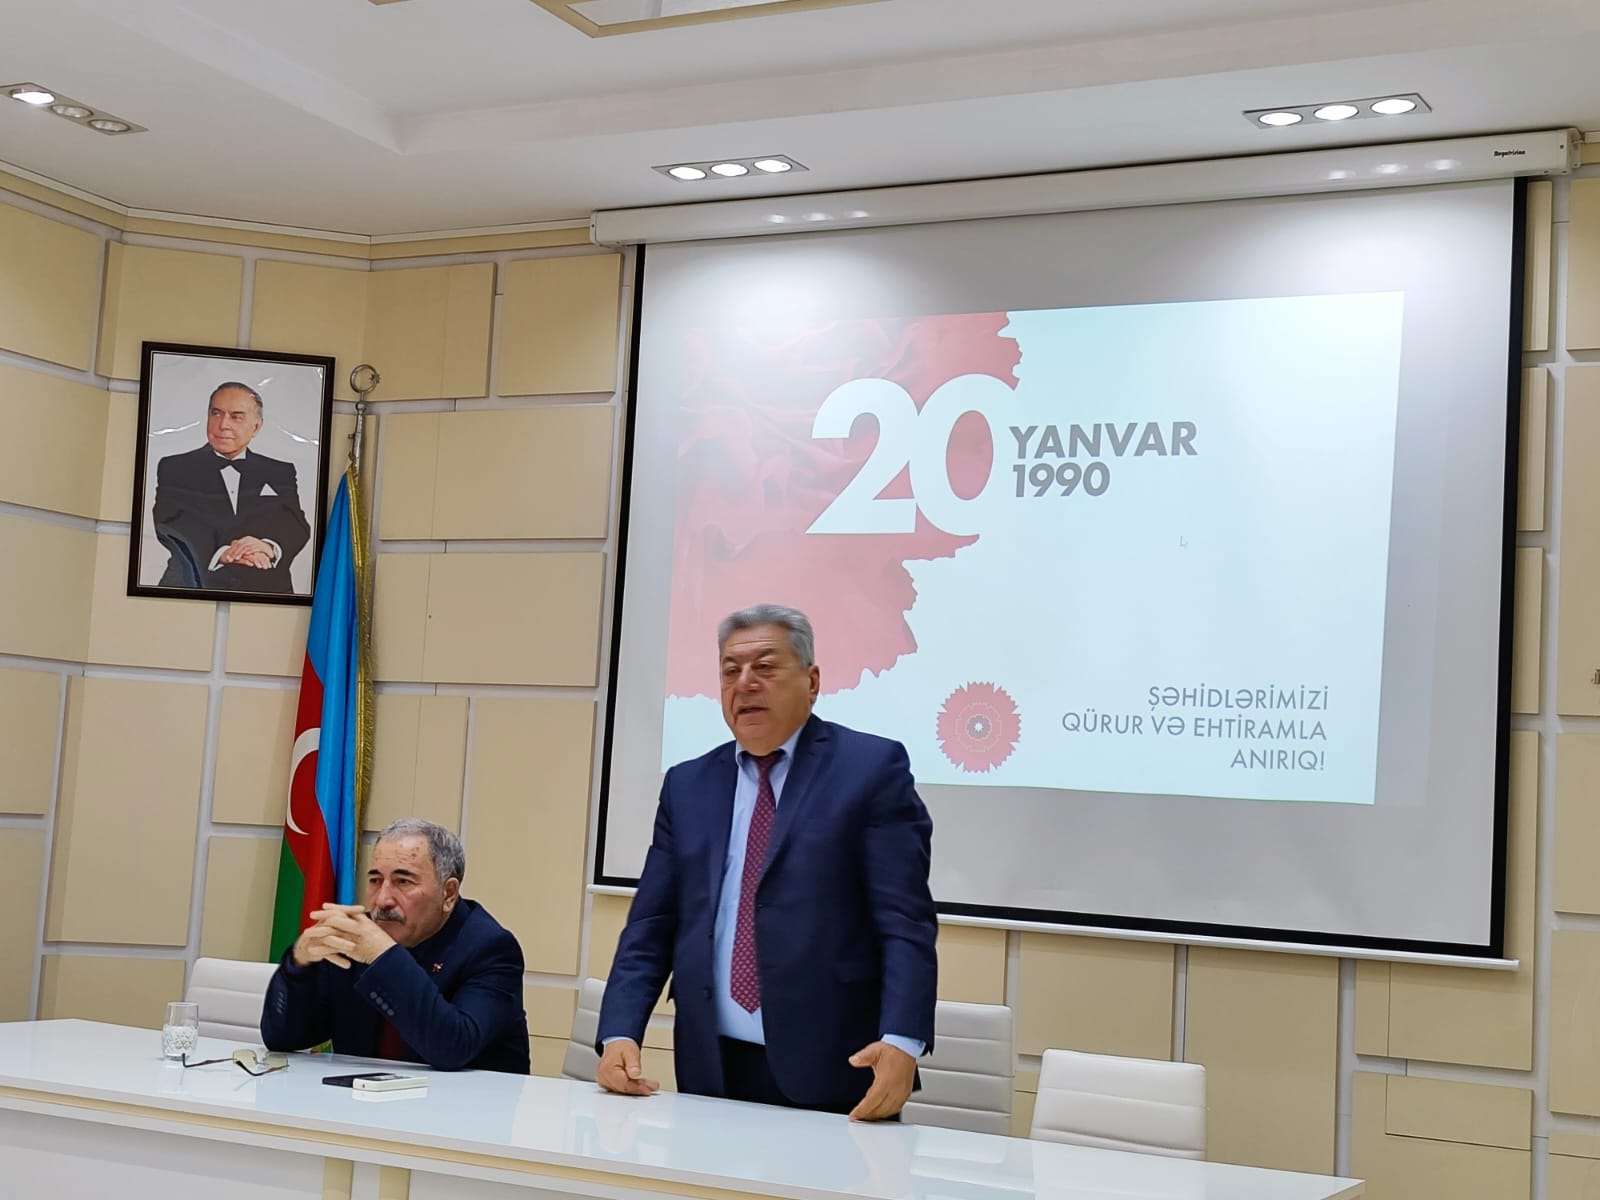 The commemorative event dedicated to the 34th anniversary of the 20 January tragedy  was held at the Institute of Soil Science and Agrochemistry of the Ministry of Science and Education of the Republic of Azerbaijan.